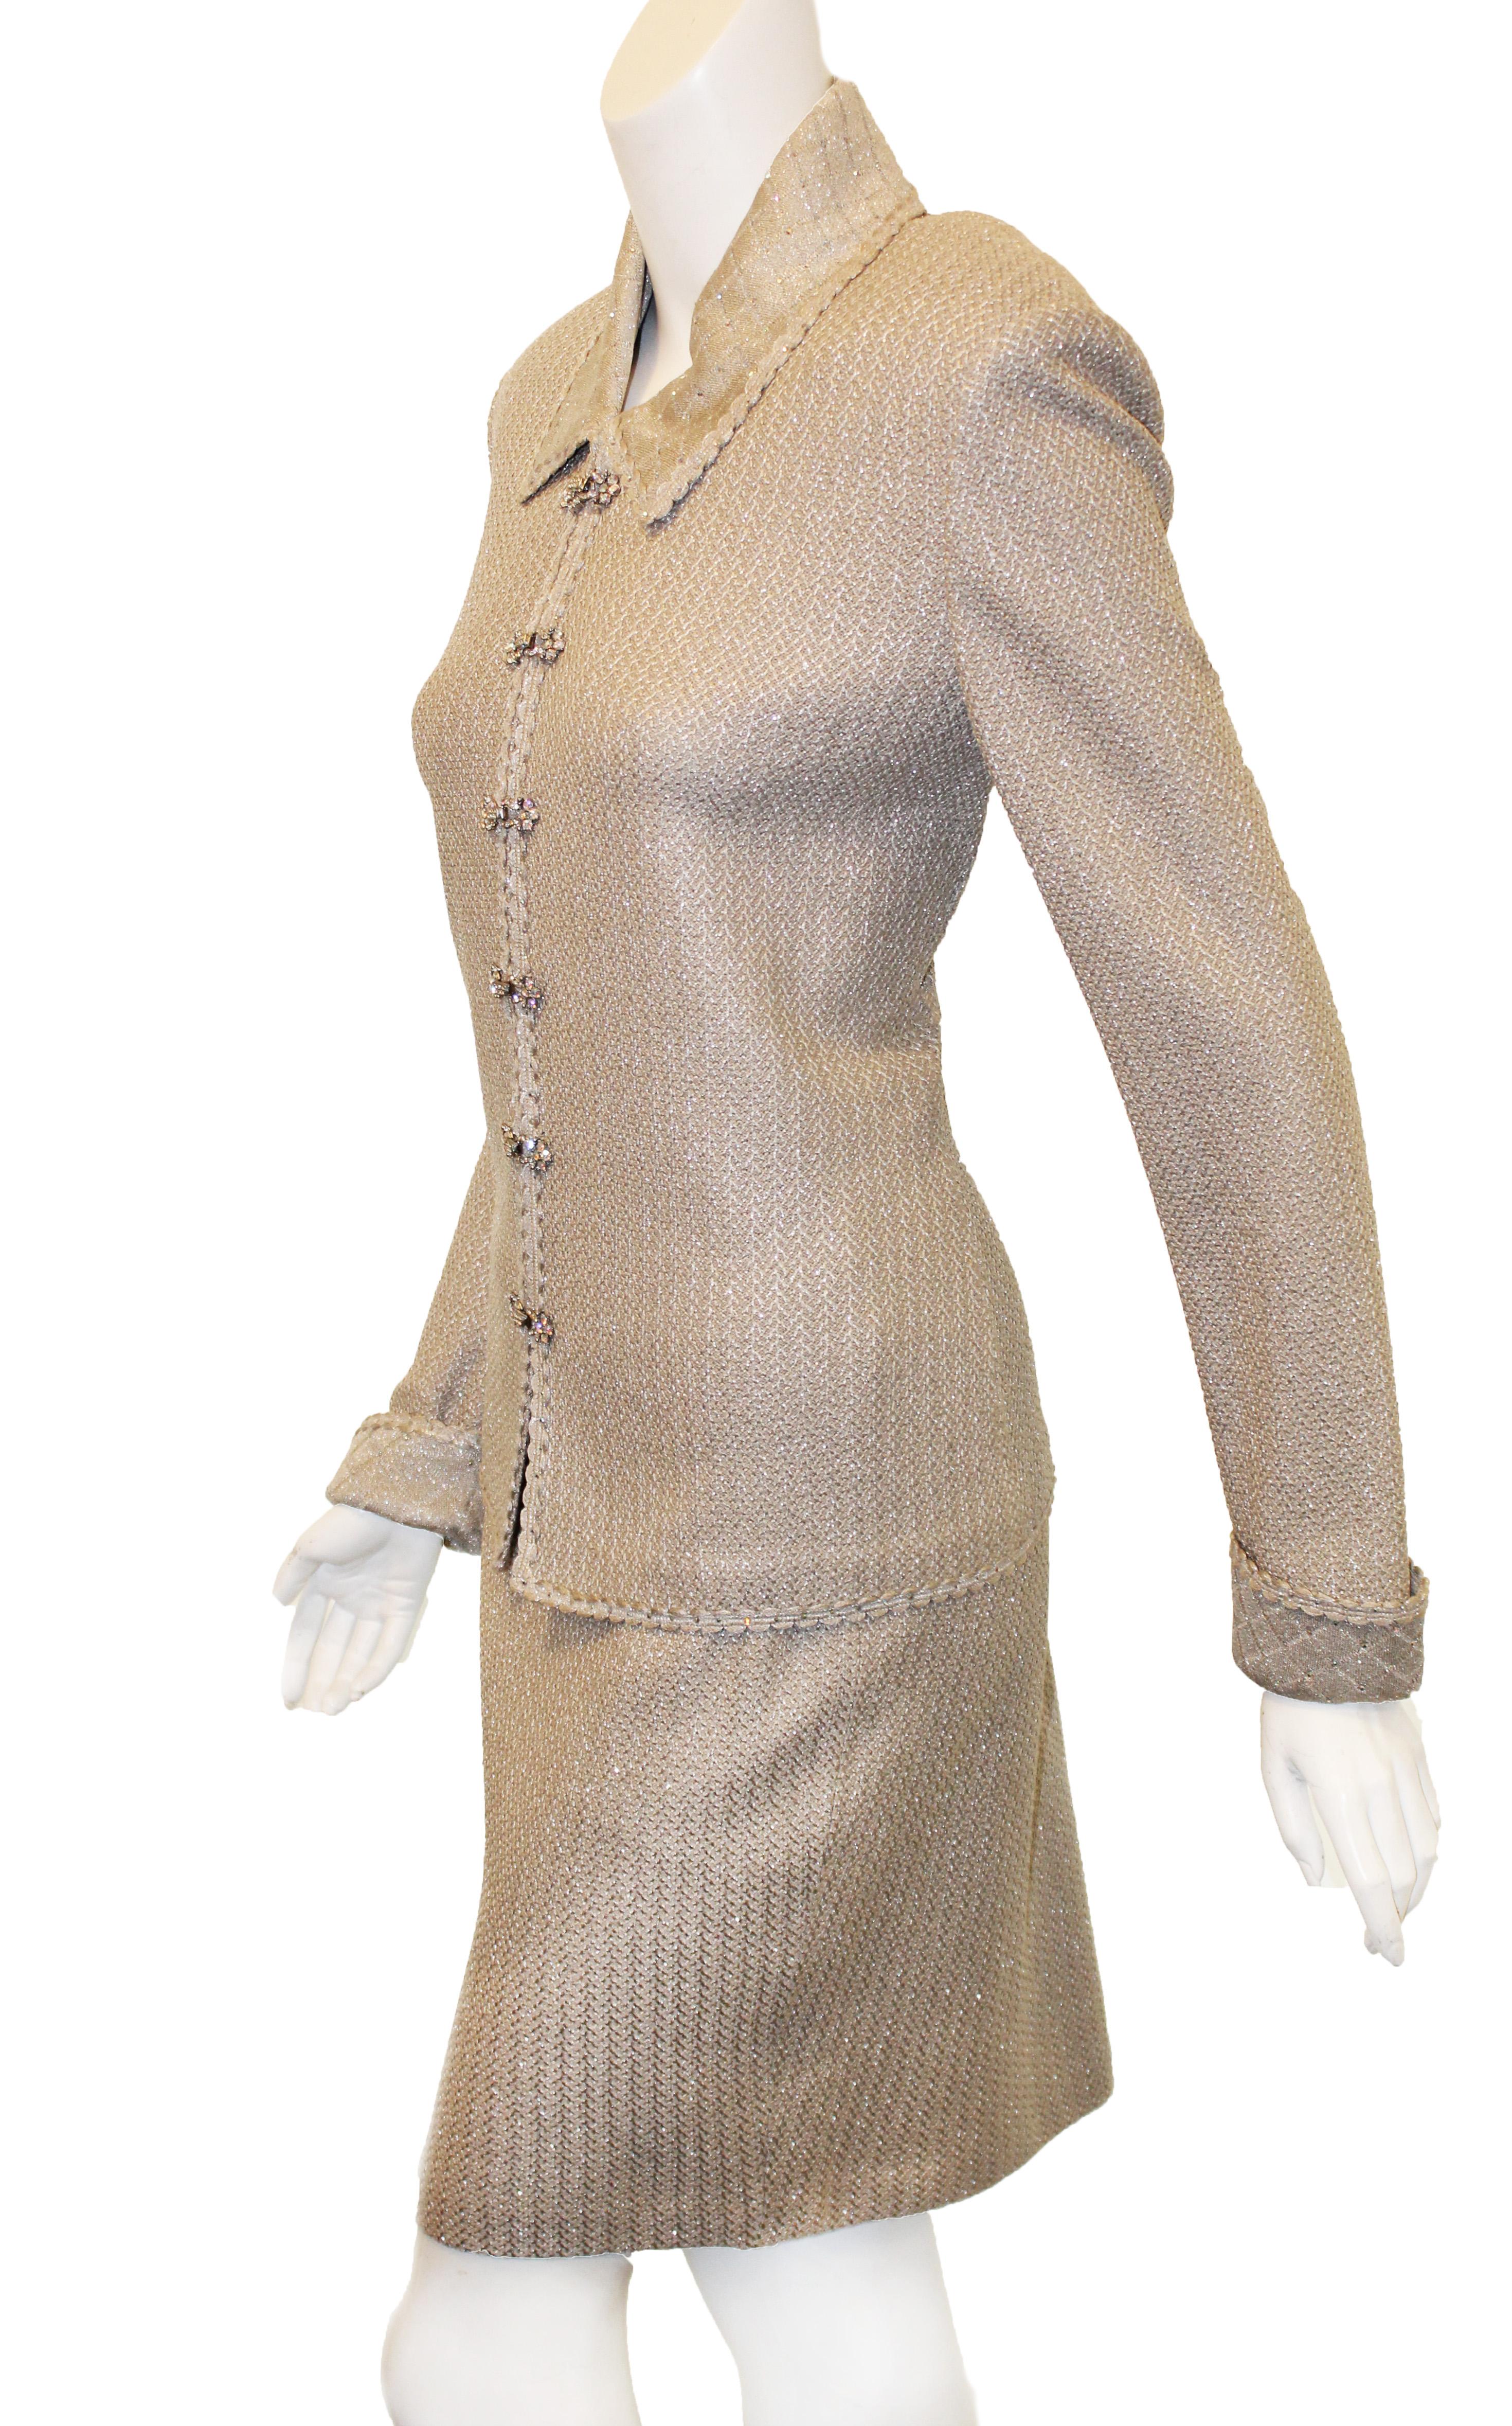 St. John Silver skirt suit is a classic but so currently smart.  This ensemble is outstanding and can be used together or separately depending on your mood of the day or night.  With a shirt collar and scalloped trim around the collar front opening,